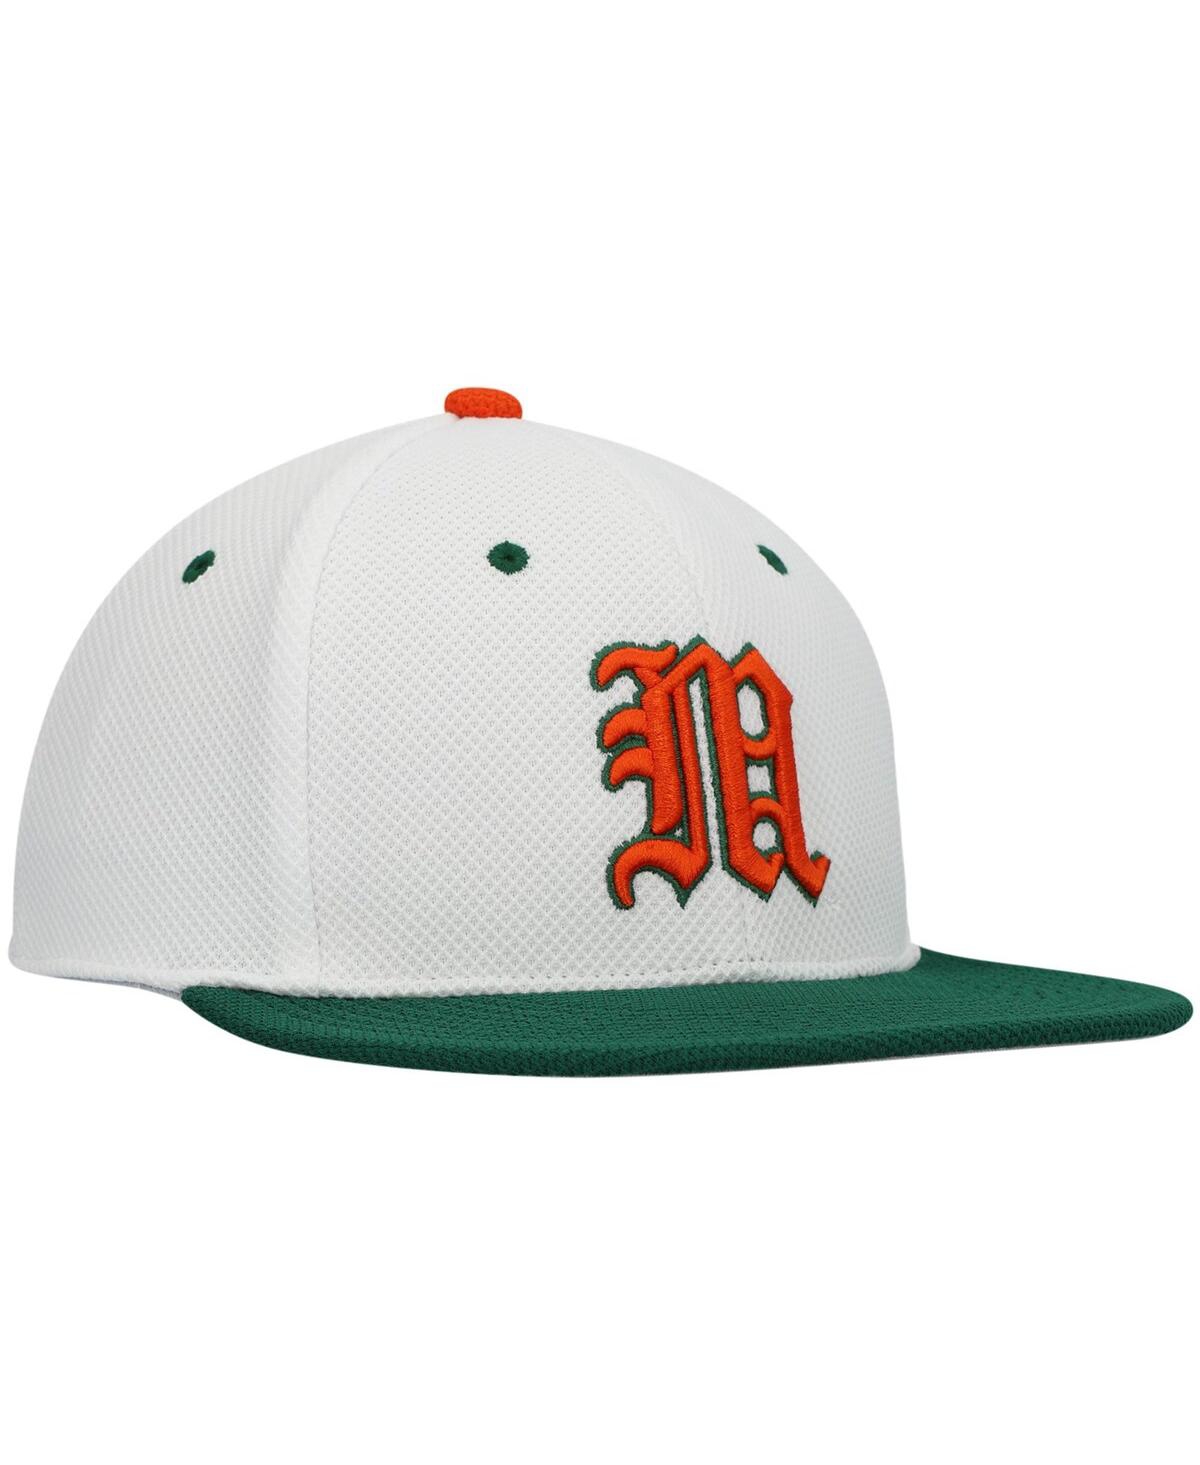 Shop Adidas Originals Men's Adidas White, Green Miami Hurricanes On-field Baseball Fitted Hat In White,green